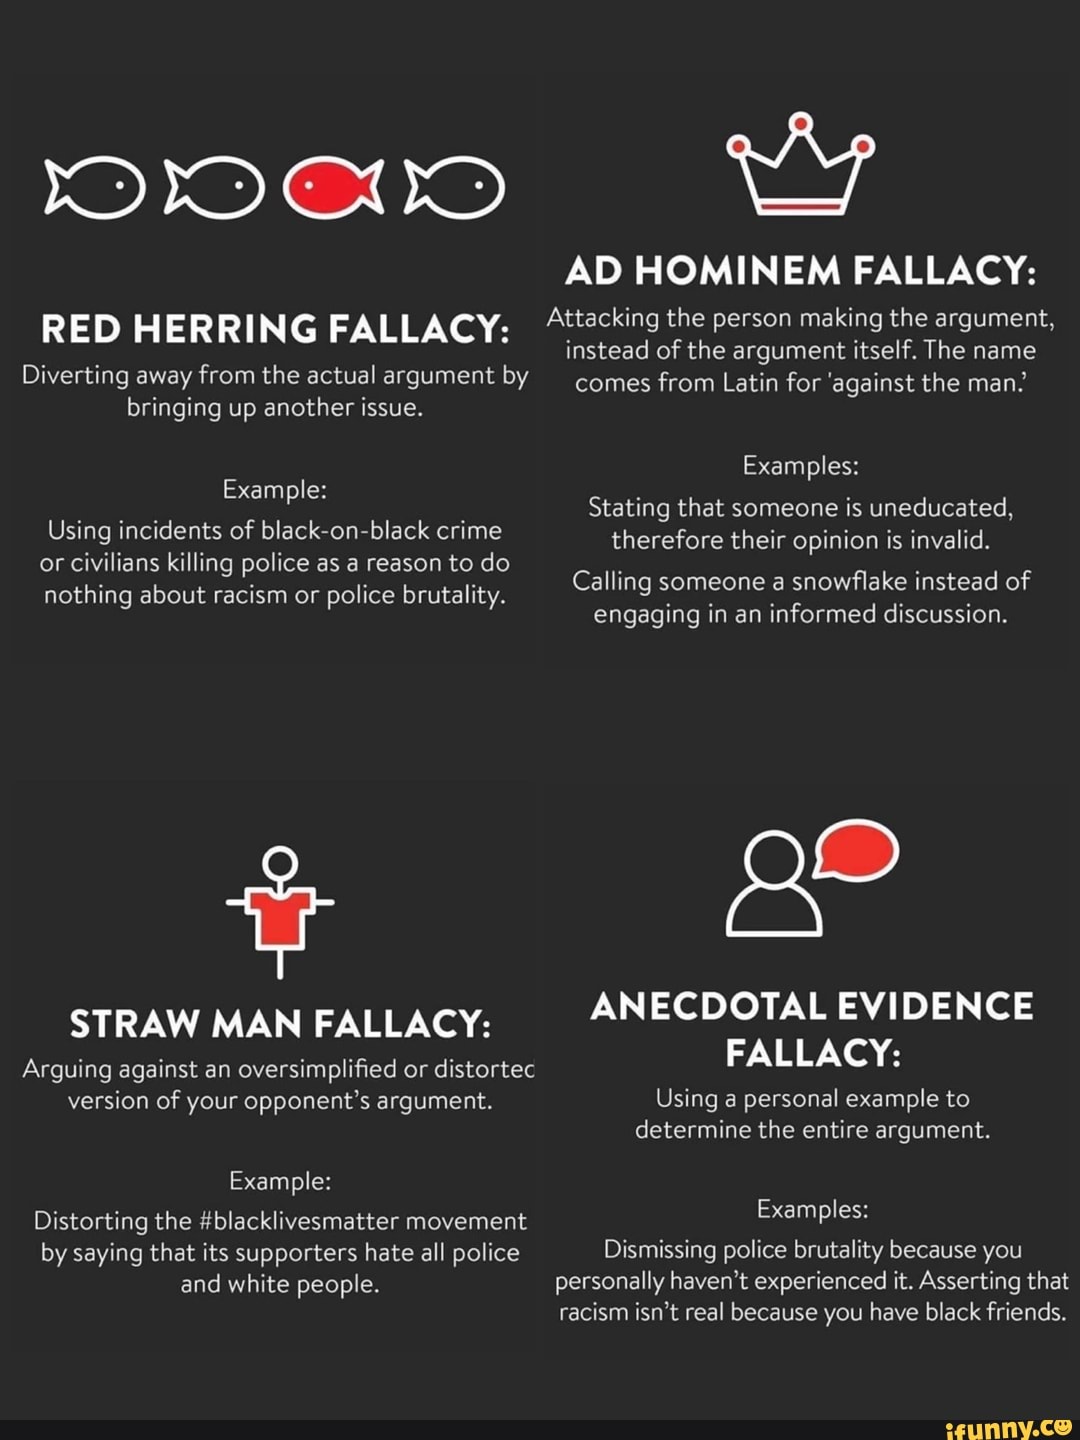 red herring fallacy ad